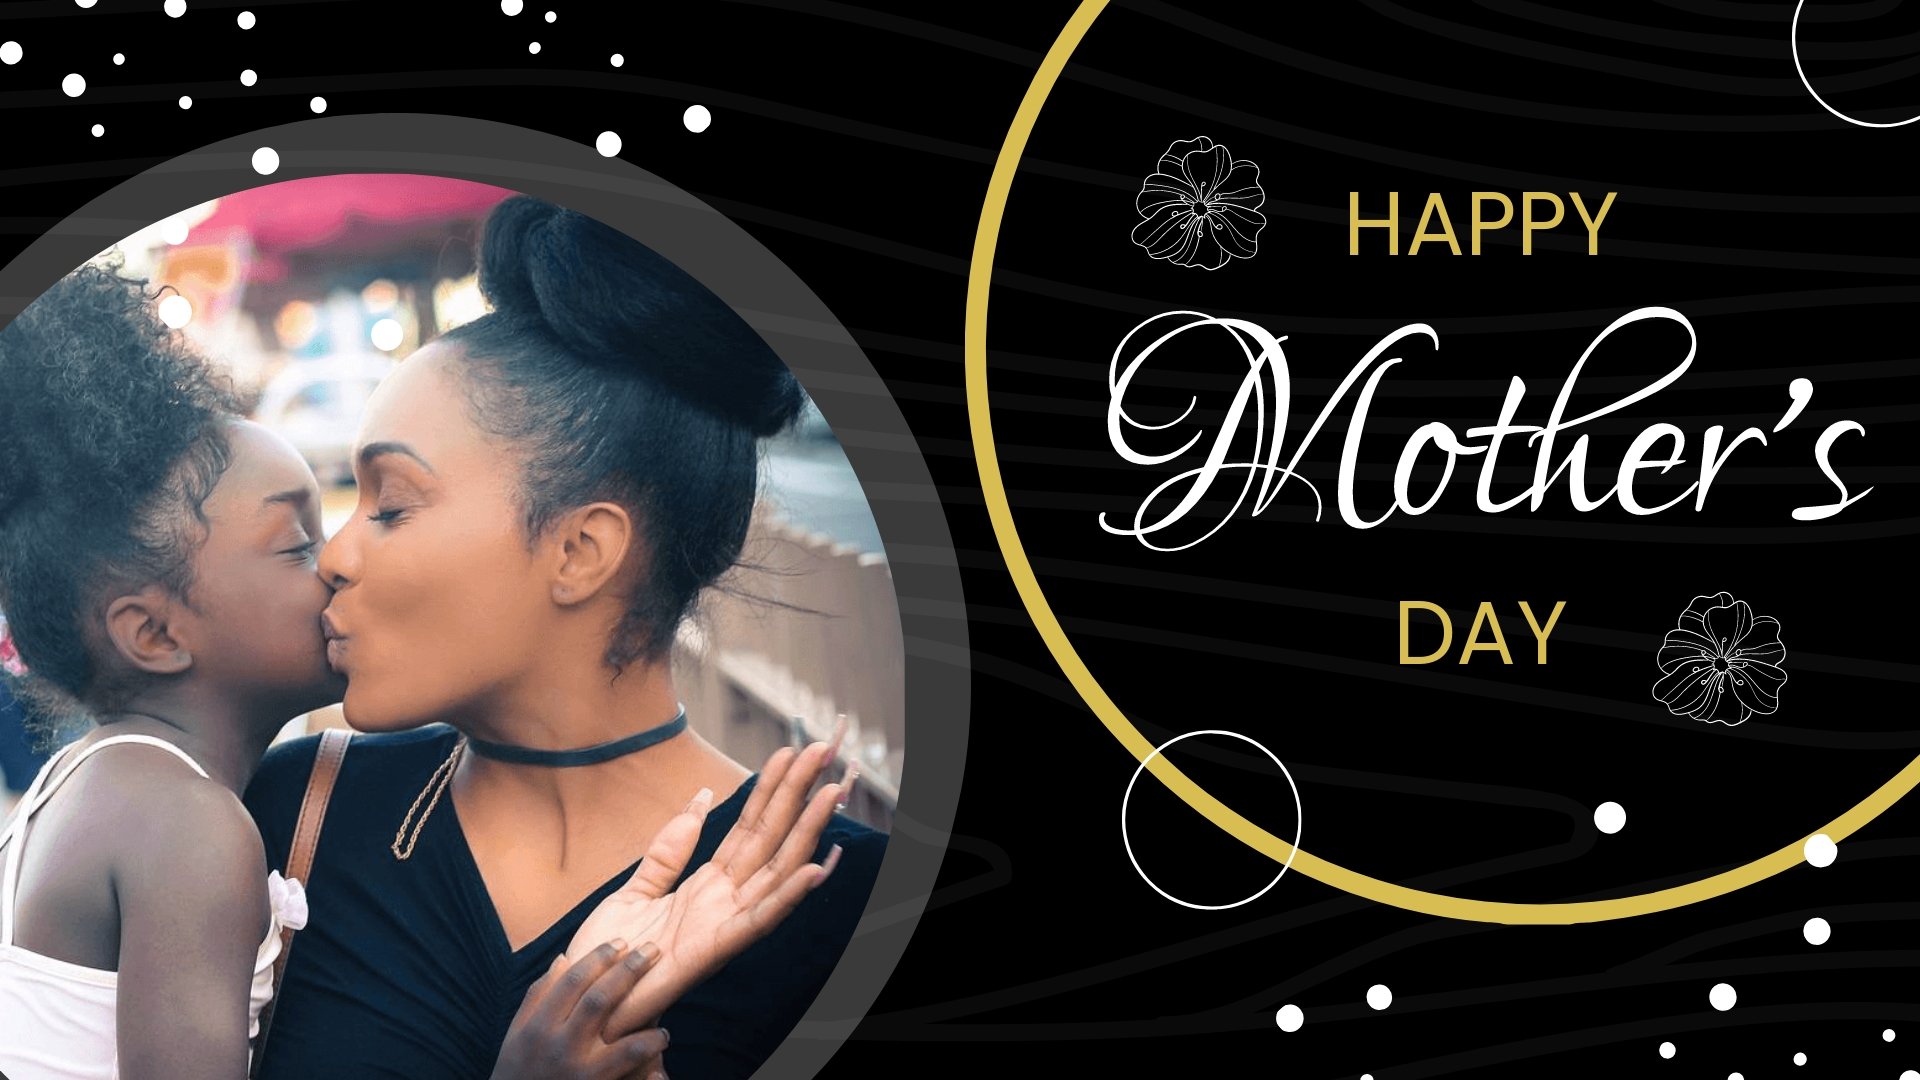 Happy Mother's Day Black Image Template